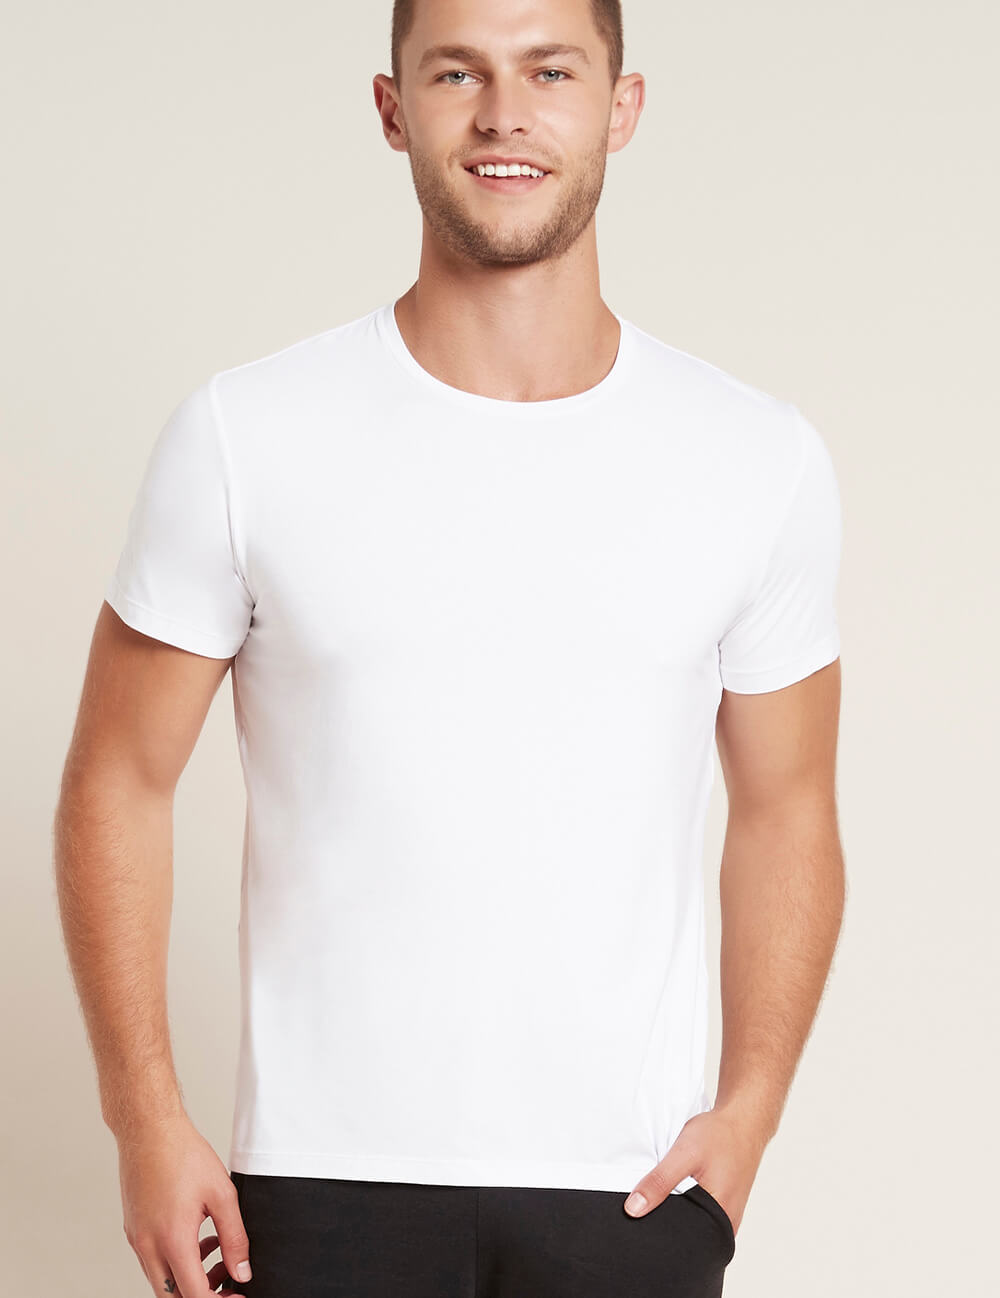 Boody Bamboo Mens Crew Neck Shirt in White Front View 4